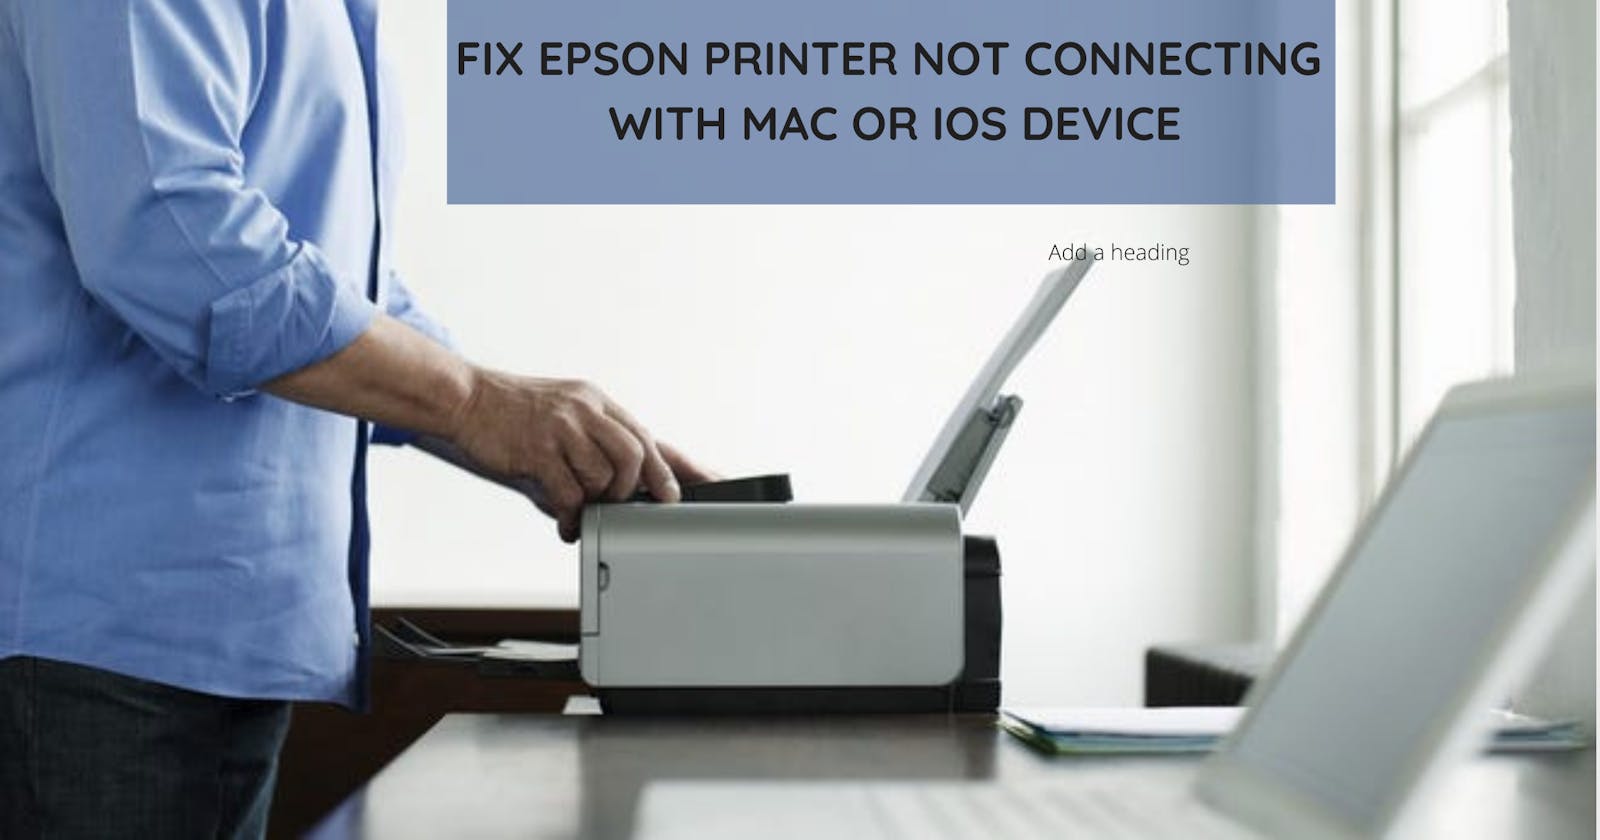 How to Fix Epson Printer is not connecting with Mac & iOS Devices?